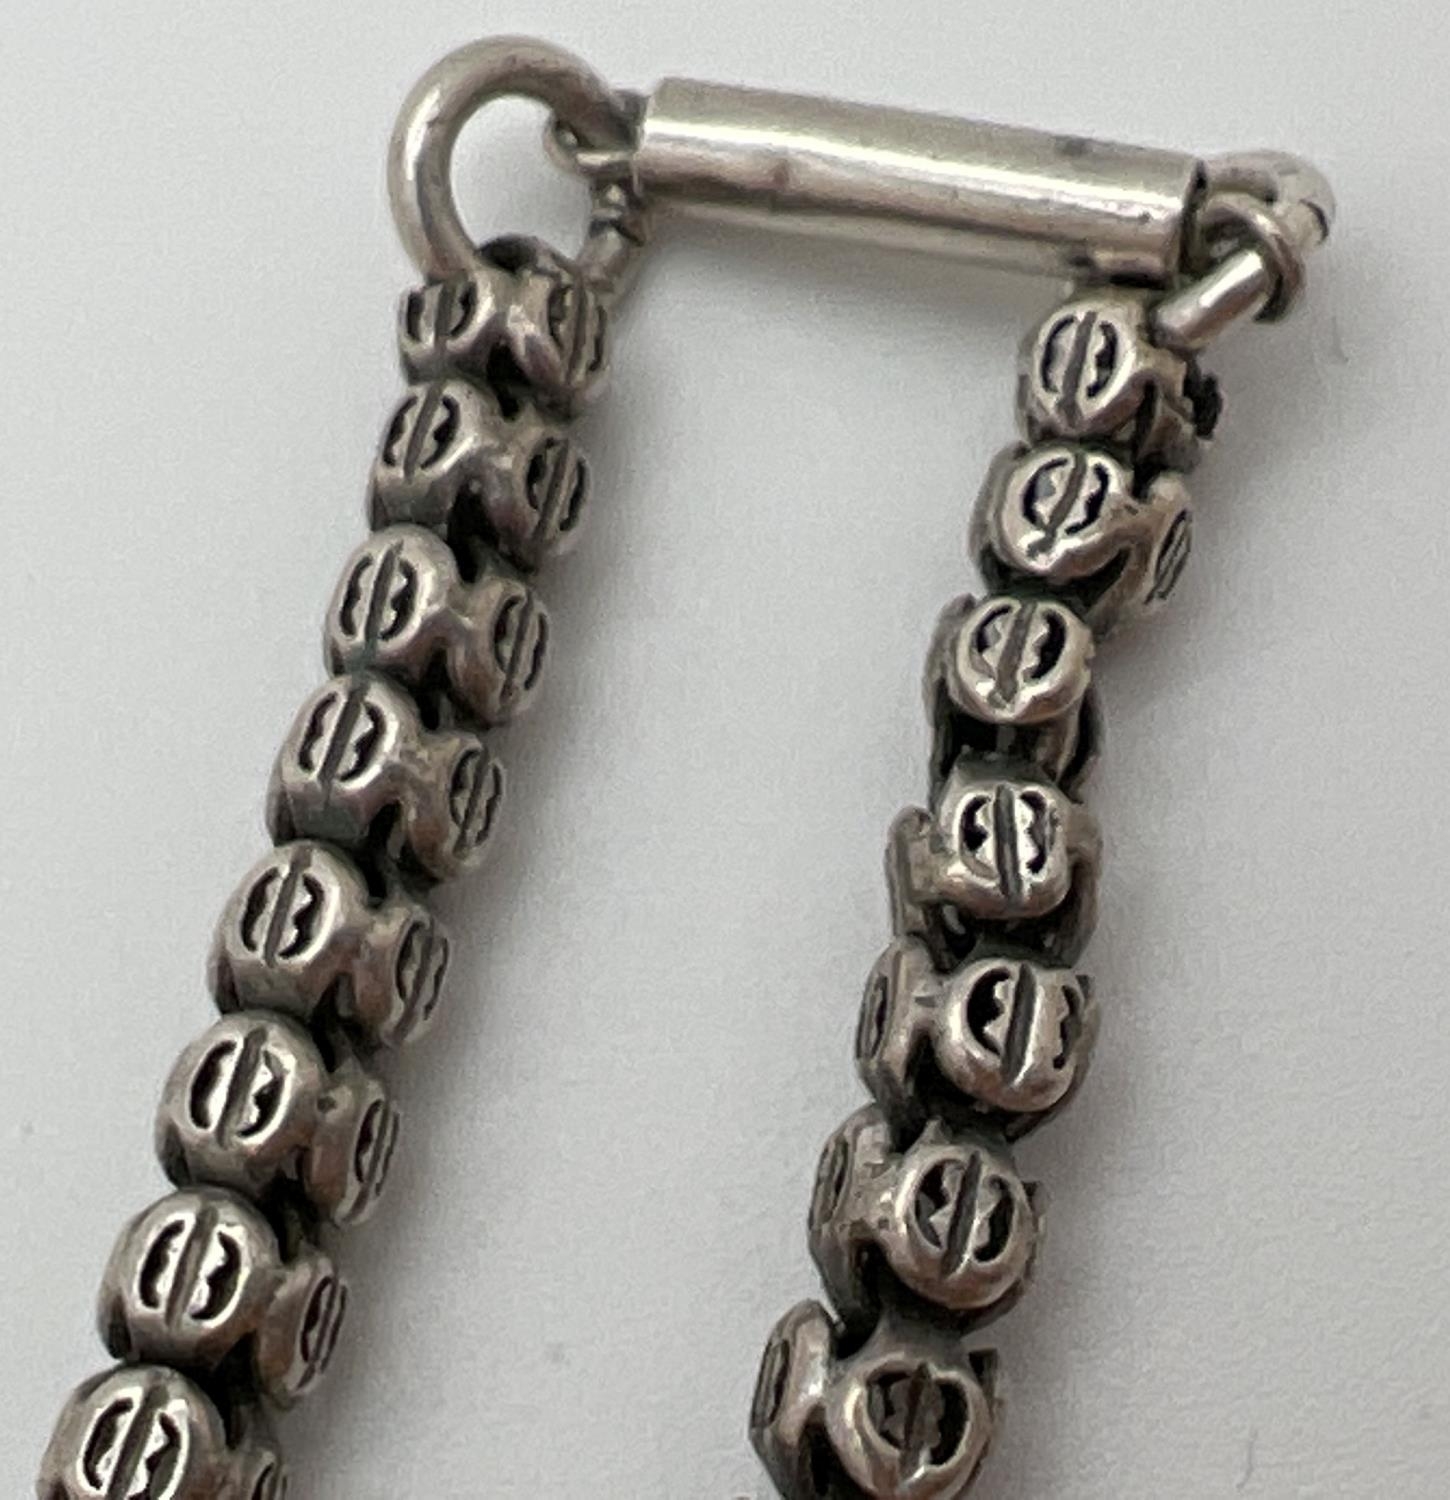 A 17 inch white metal bead chain necklace with pierced detail and barrel push clasp. - Image 3 of 3